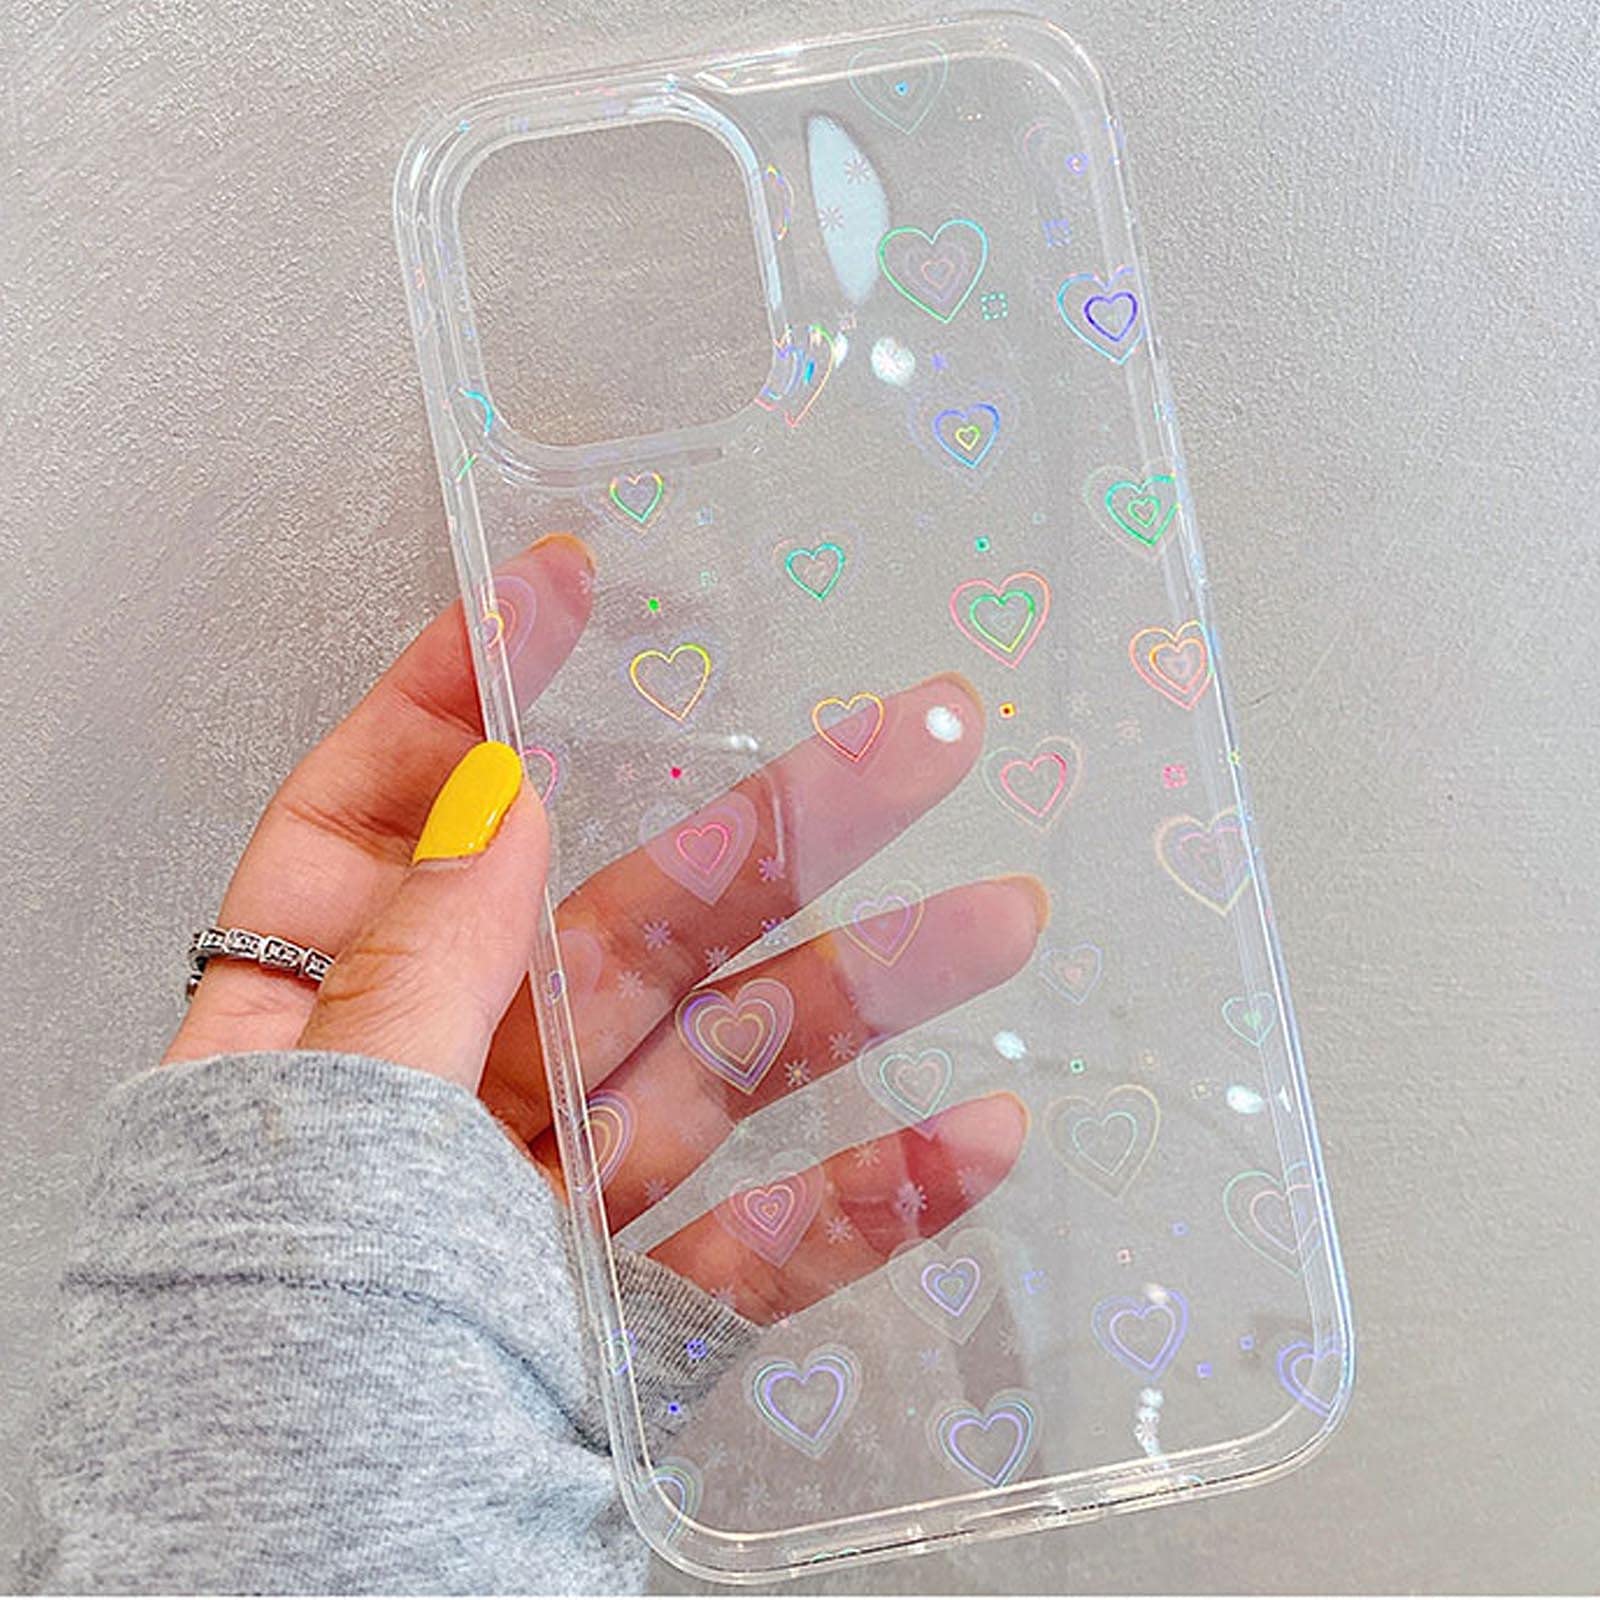 SmoBea Compatible with iPhone 13 Mini Case, for Laser Glitter Bling Heart Soft & Flexible TPU and Hard PC Back Shockproof Cover Women Girls Heart Pattern Phone Case (Rainbow Heart/Clear)